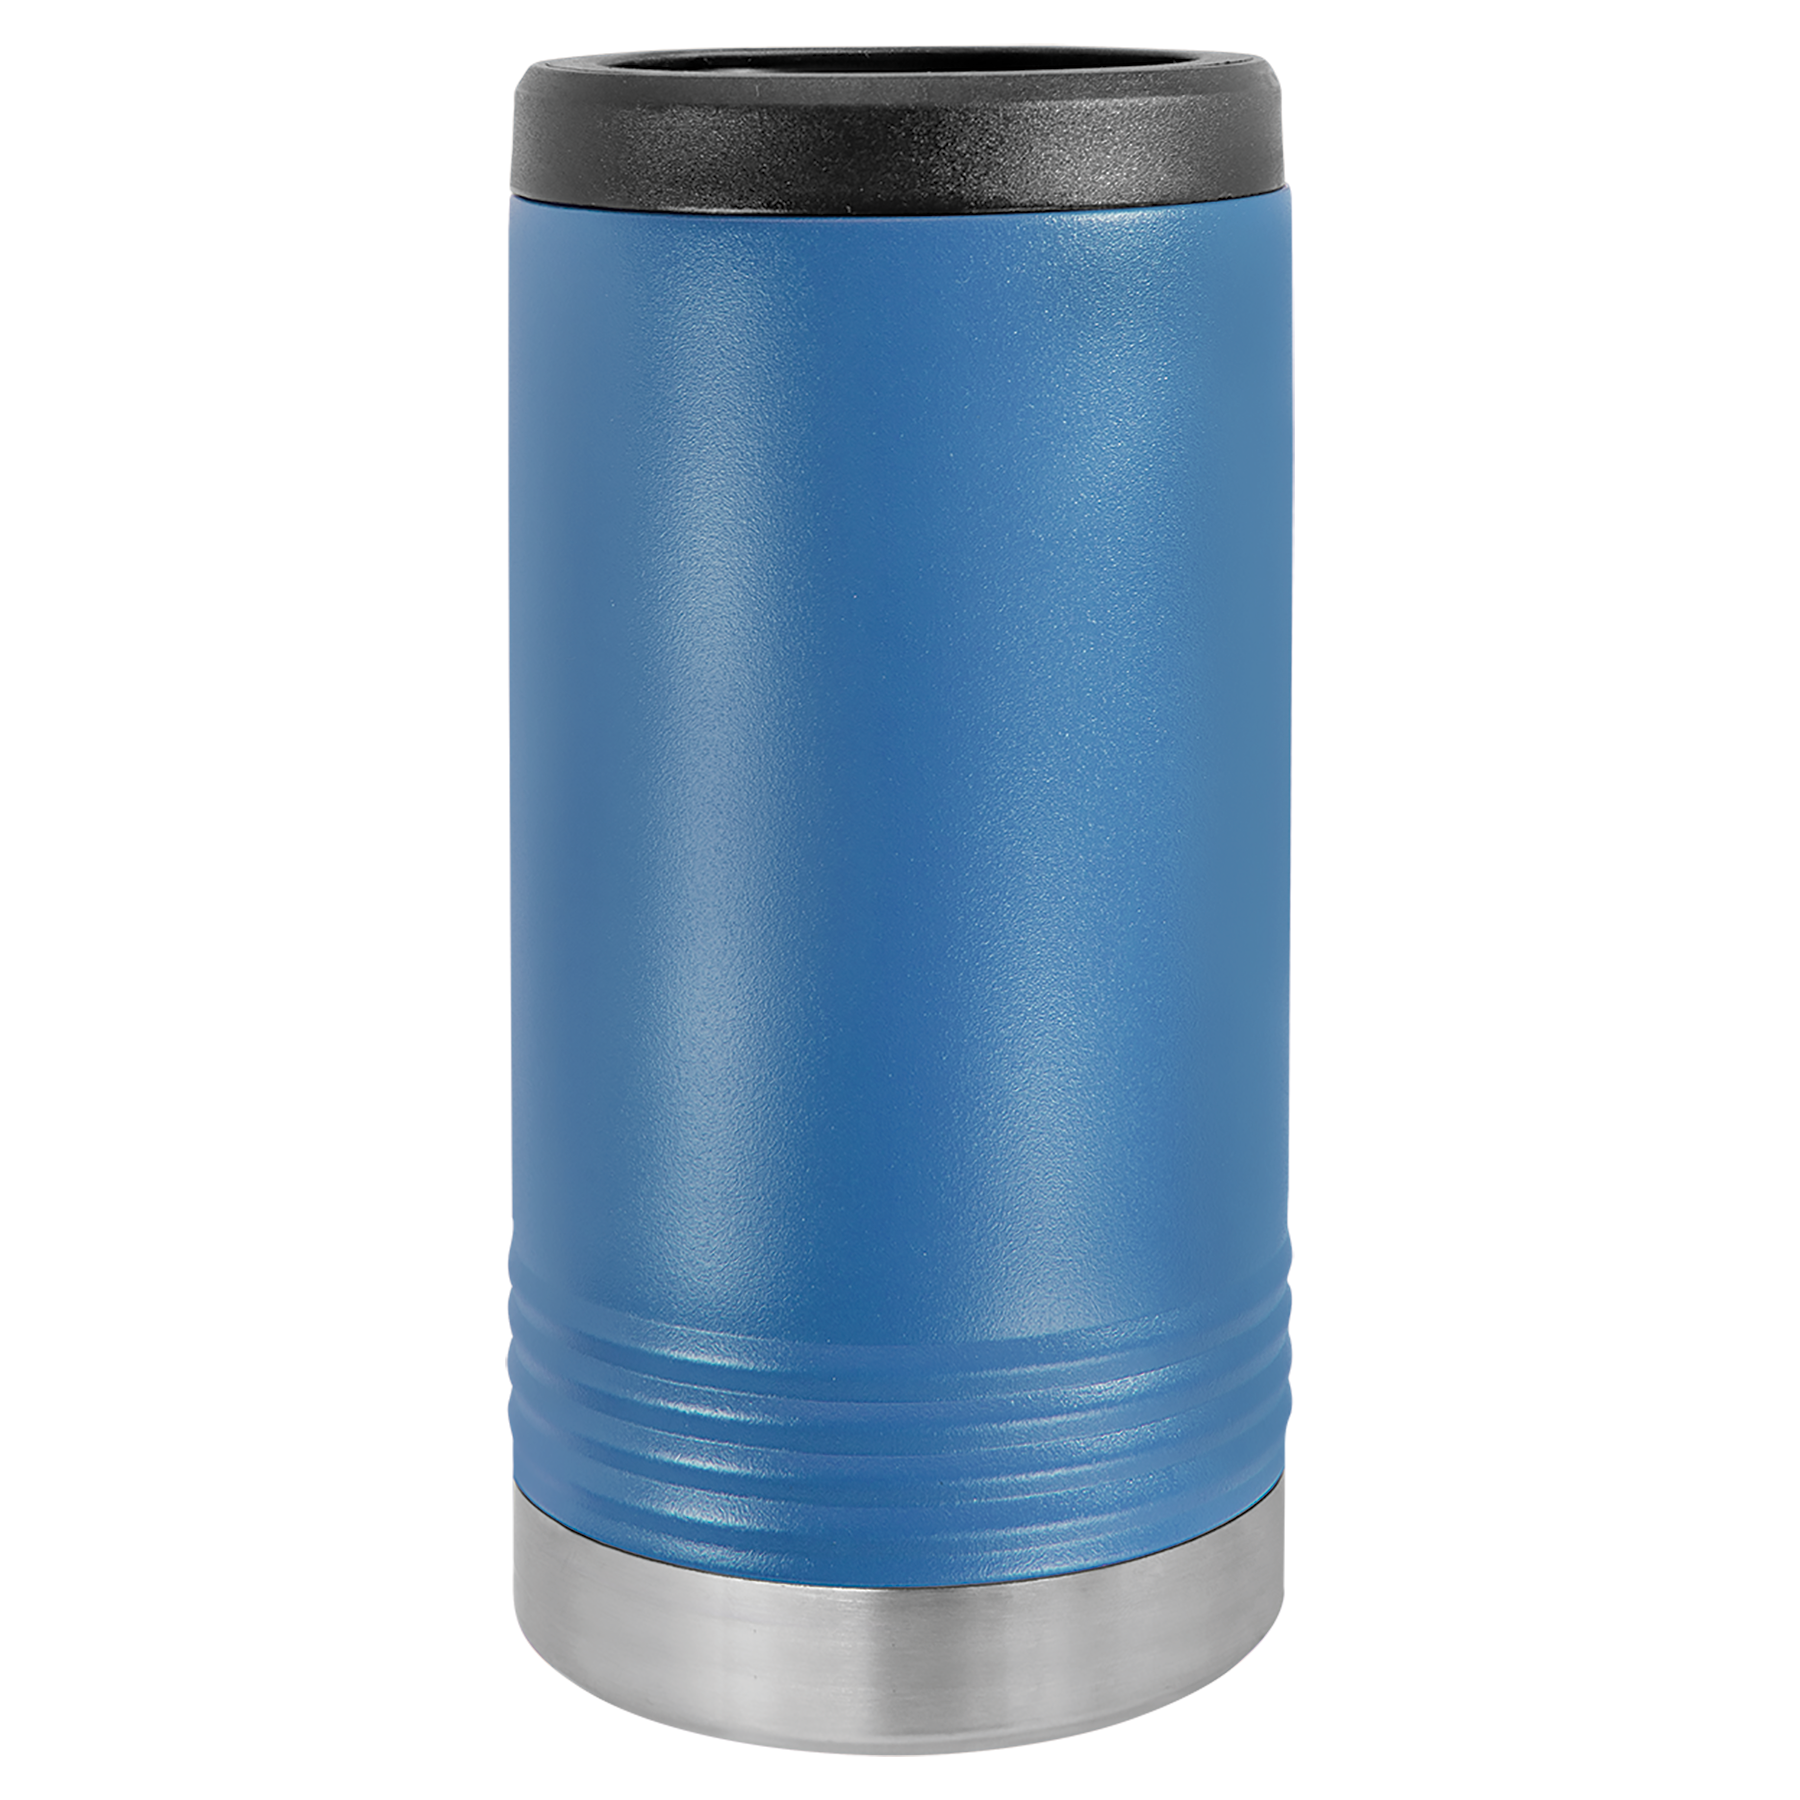 Royal Blue Slim Beverage Holder -One Free Engraving   -Double-wall Vacuum Insulated  -Made from 18/8 Gauge Stainless Steel (Type 304 Food Grade)  -Fits most Tall Slim Cans  -Not recommended for Dishwasher  -Works with Cold and Hot Drinks  -17 Color Options  -Perfect for Personalized Gifts, Awards, Incentives, Swag & Fundraisers